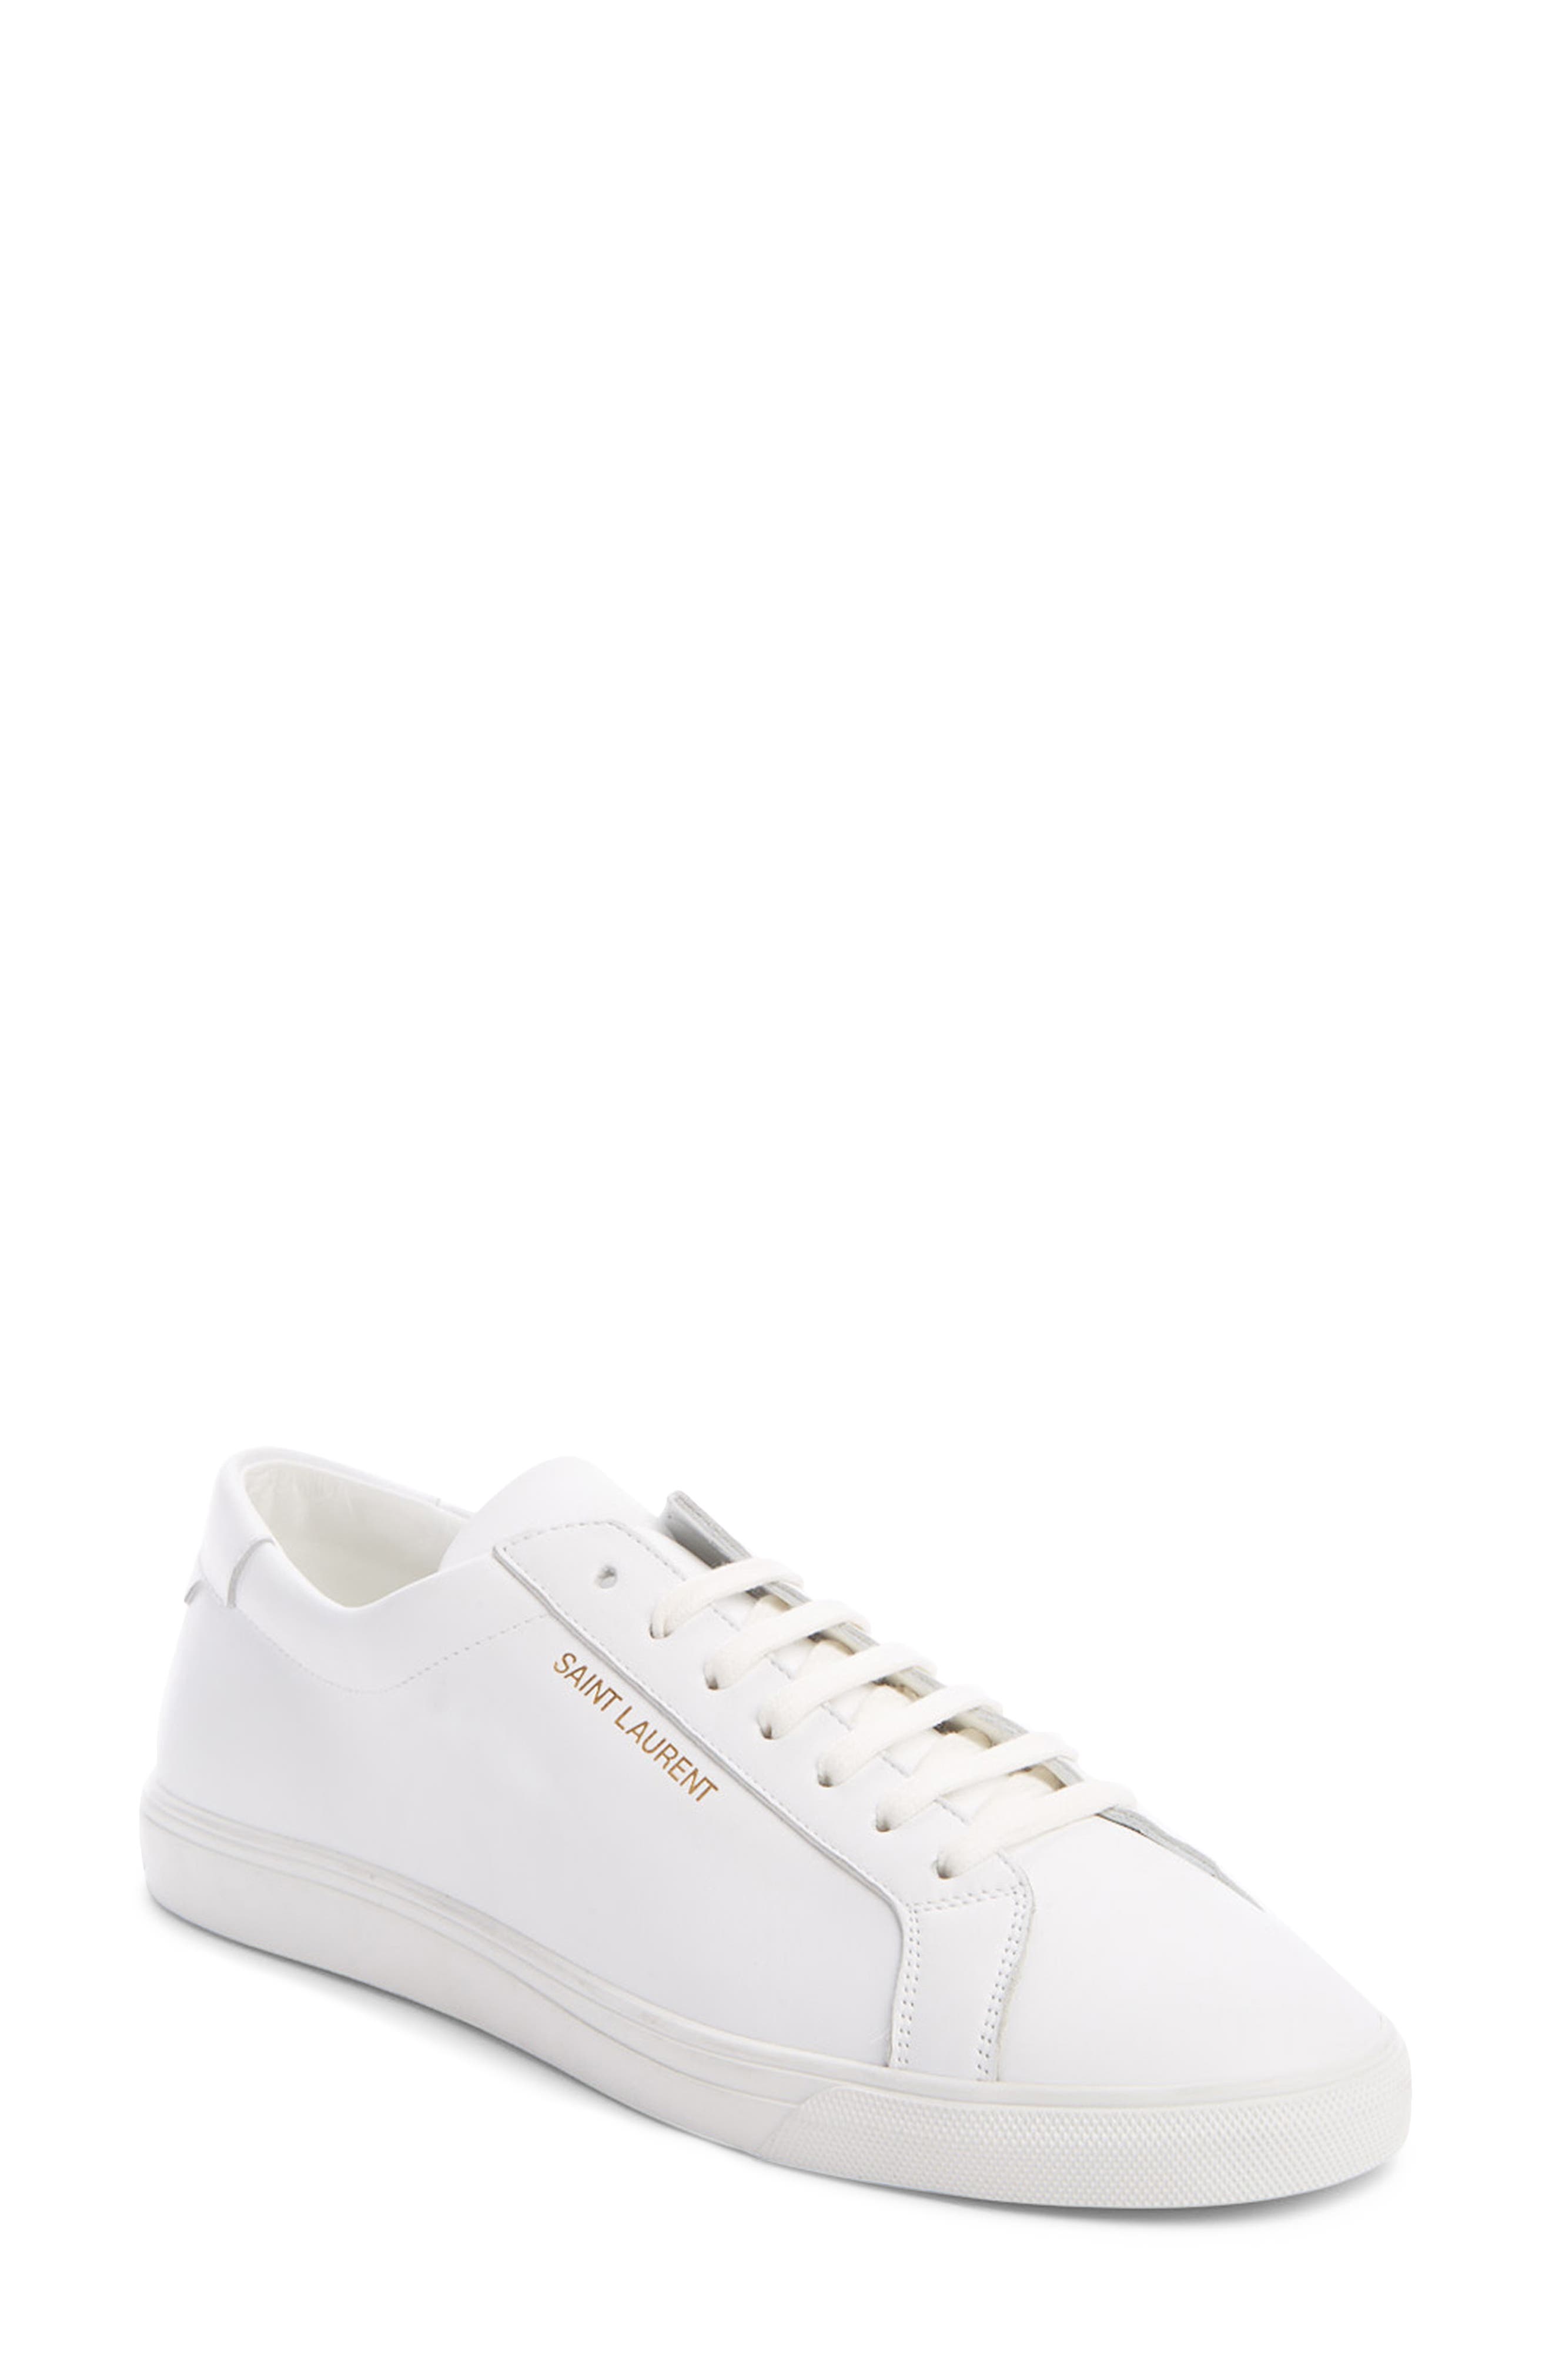 saint laurent white andy sneakers